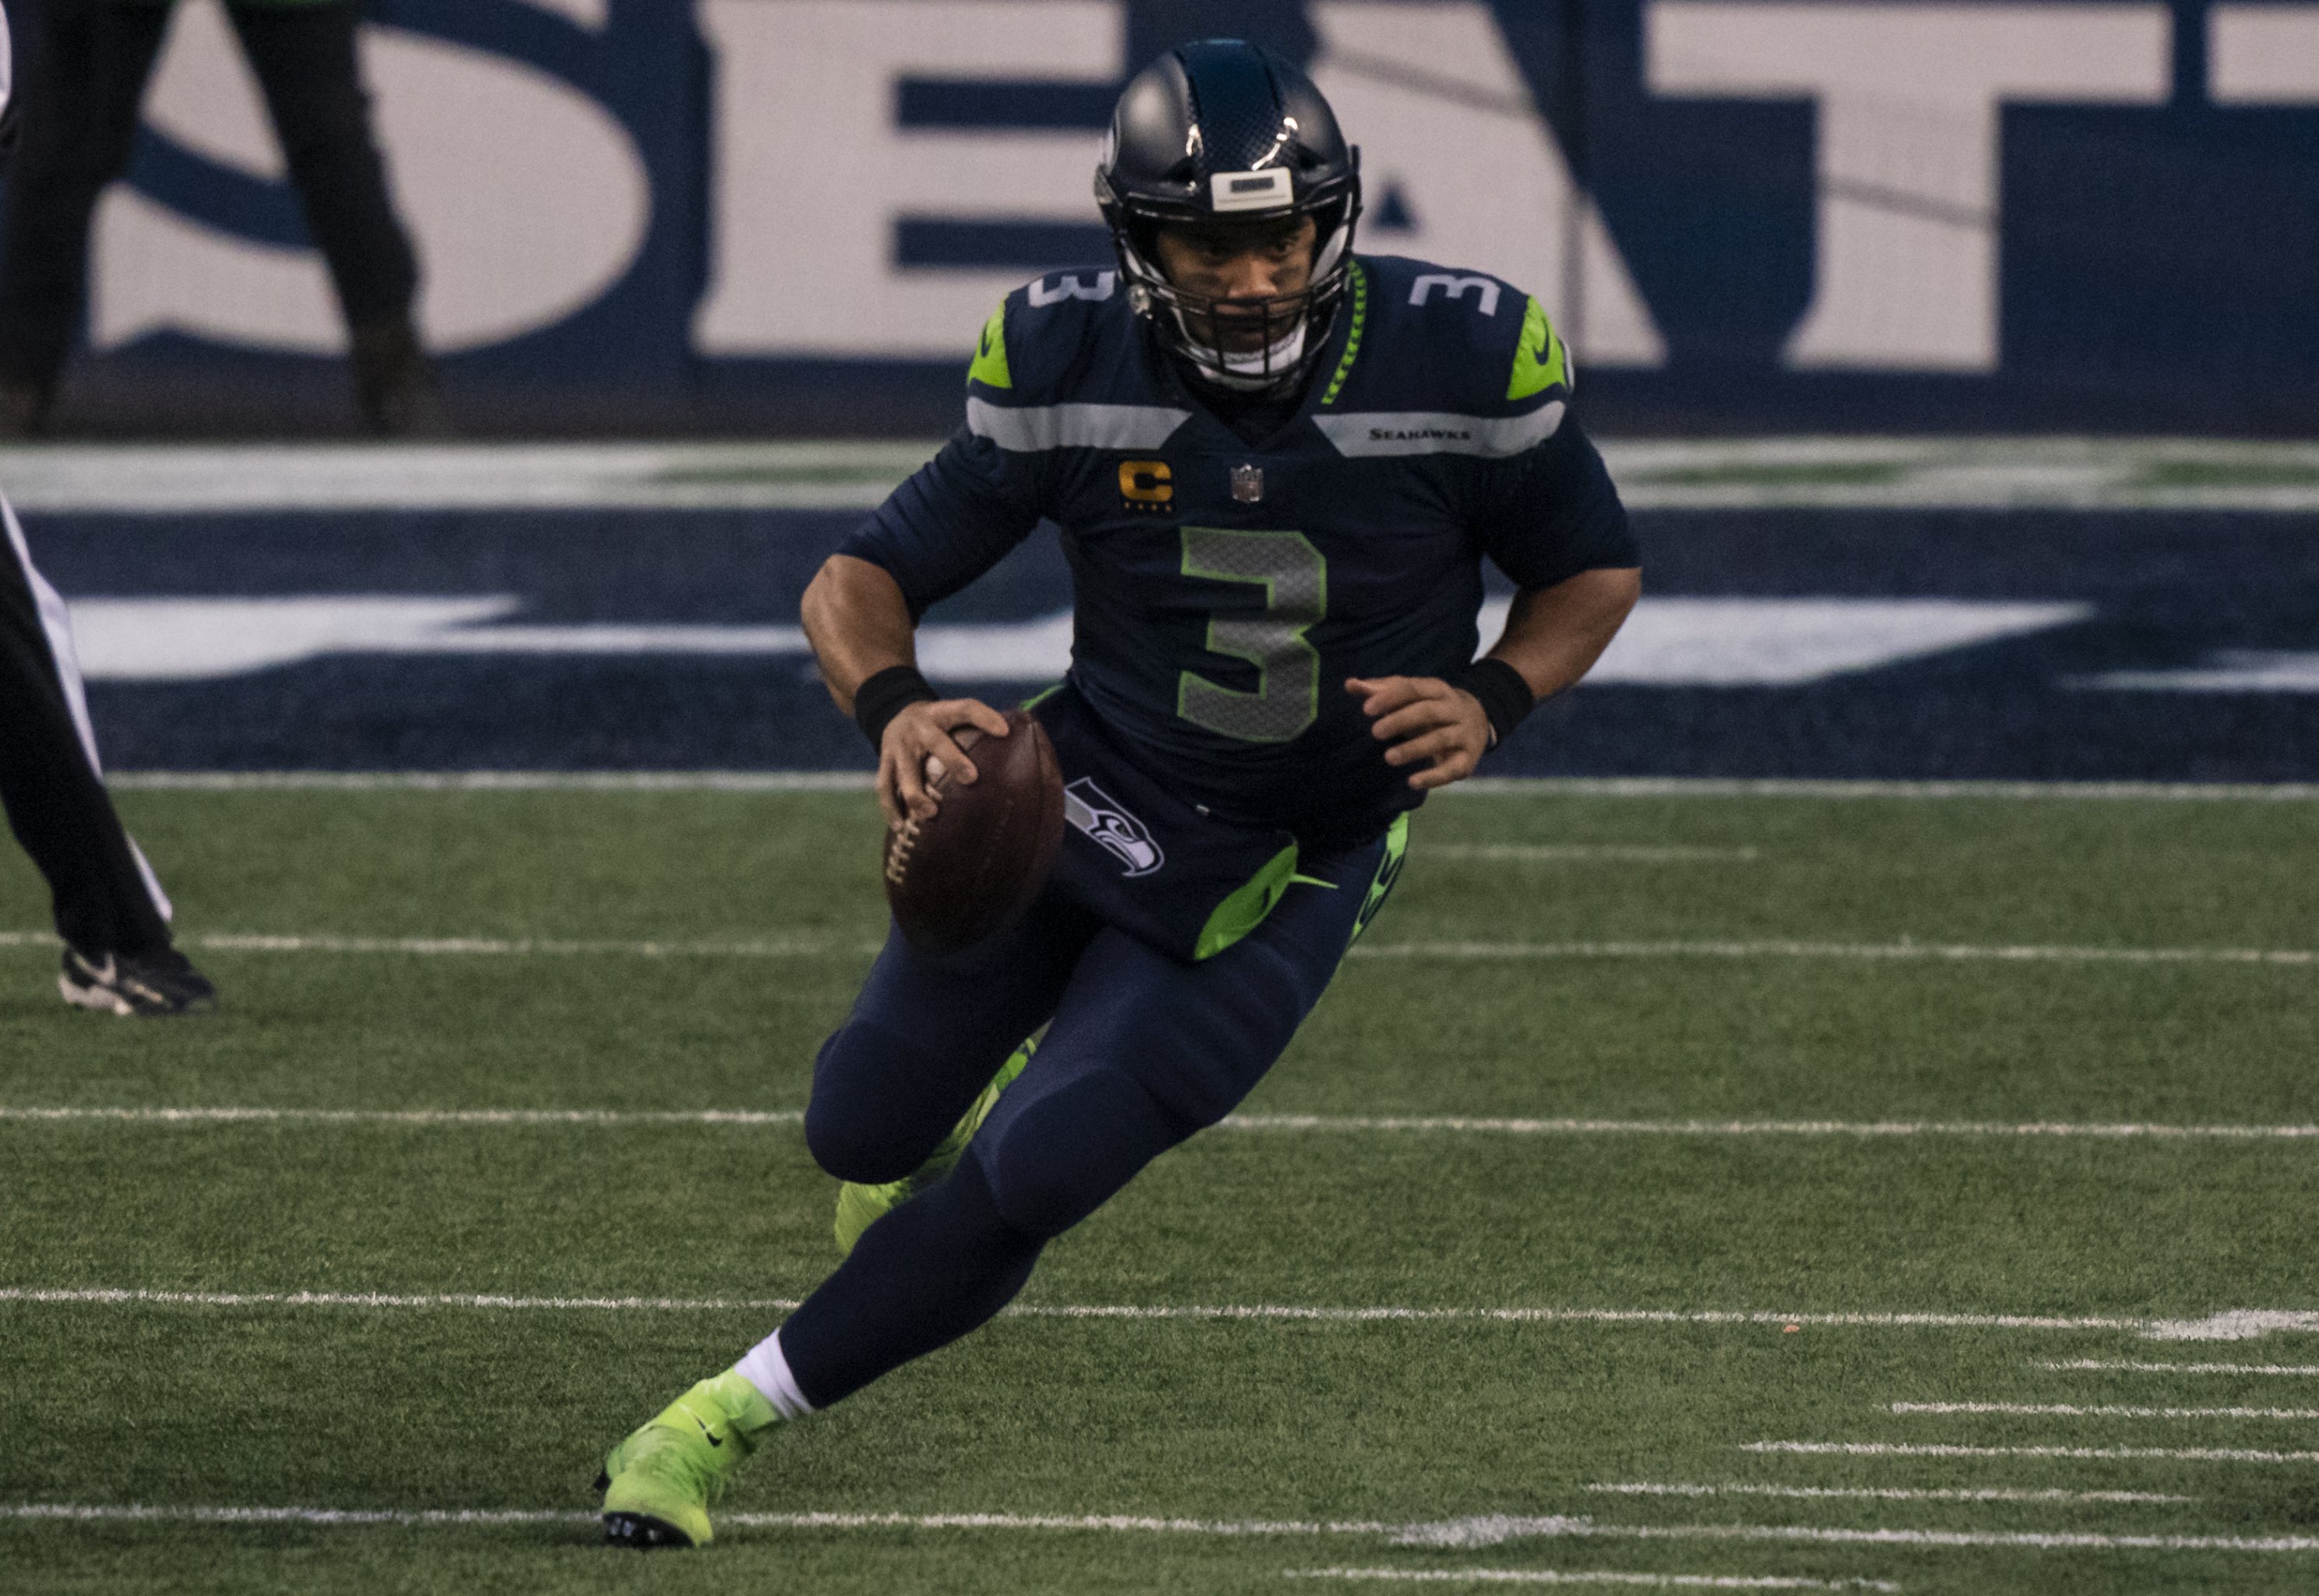 Seattle Sports on X: BREAKING: The Seattle Seahawks 2021-22 schedule has  been officially released. Seattle faces off against the Colts to start  their season and will feature 5 primetime games in the